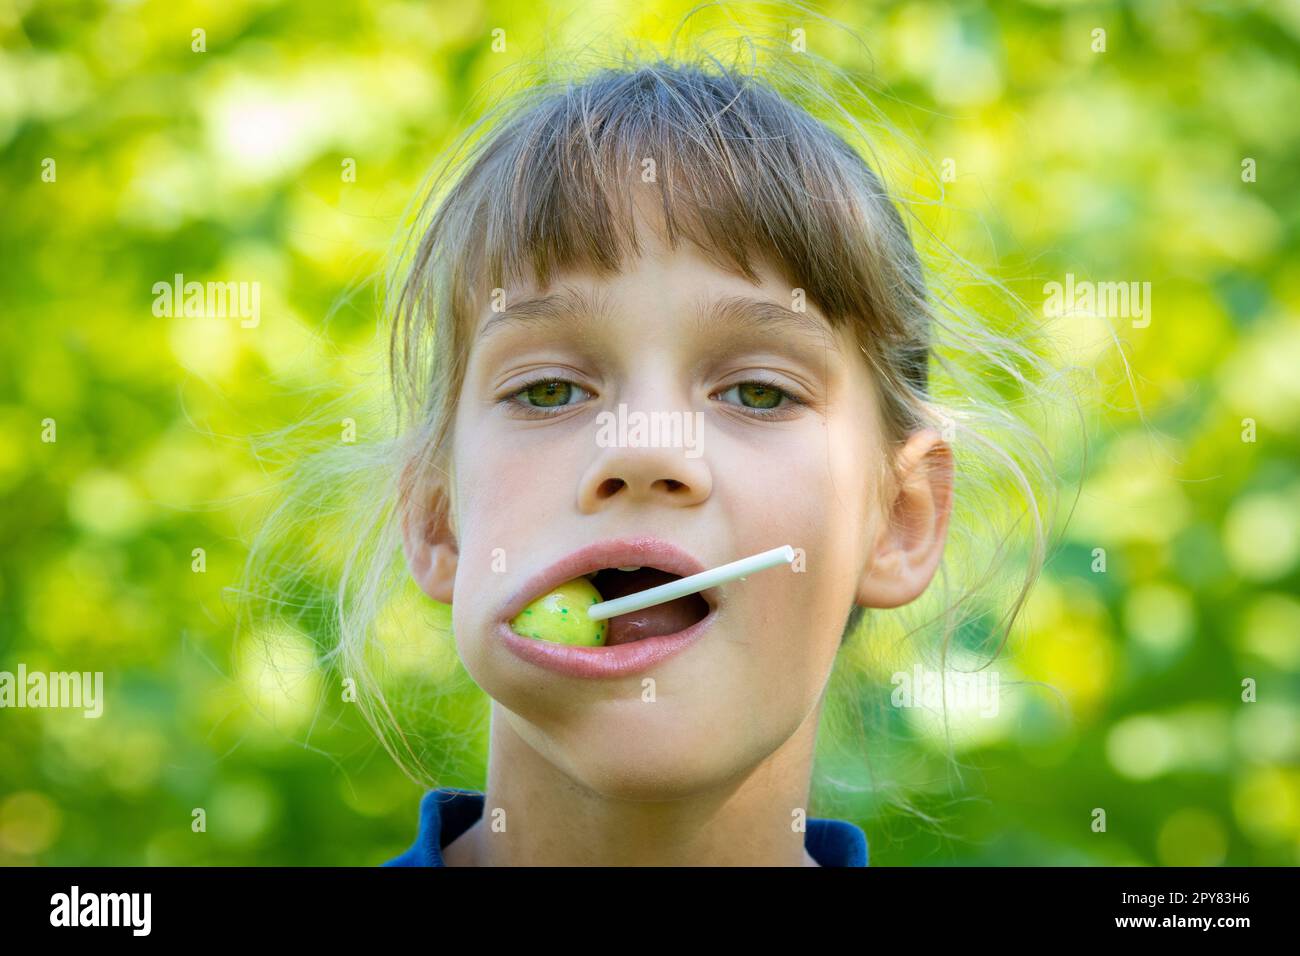 The girl has a big round lollipop in her mouth, close-up portrait Stock Photo